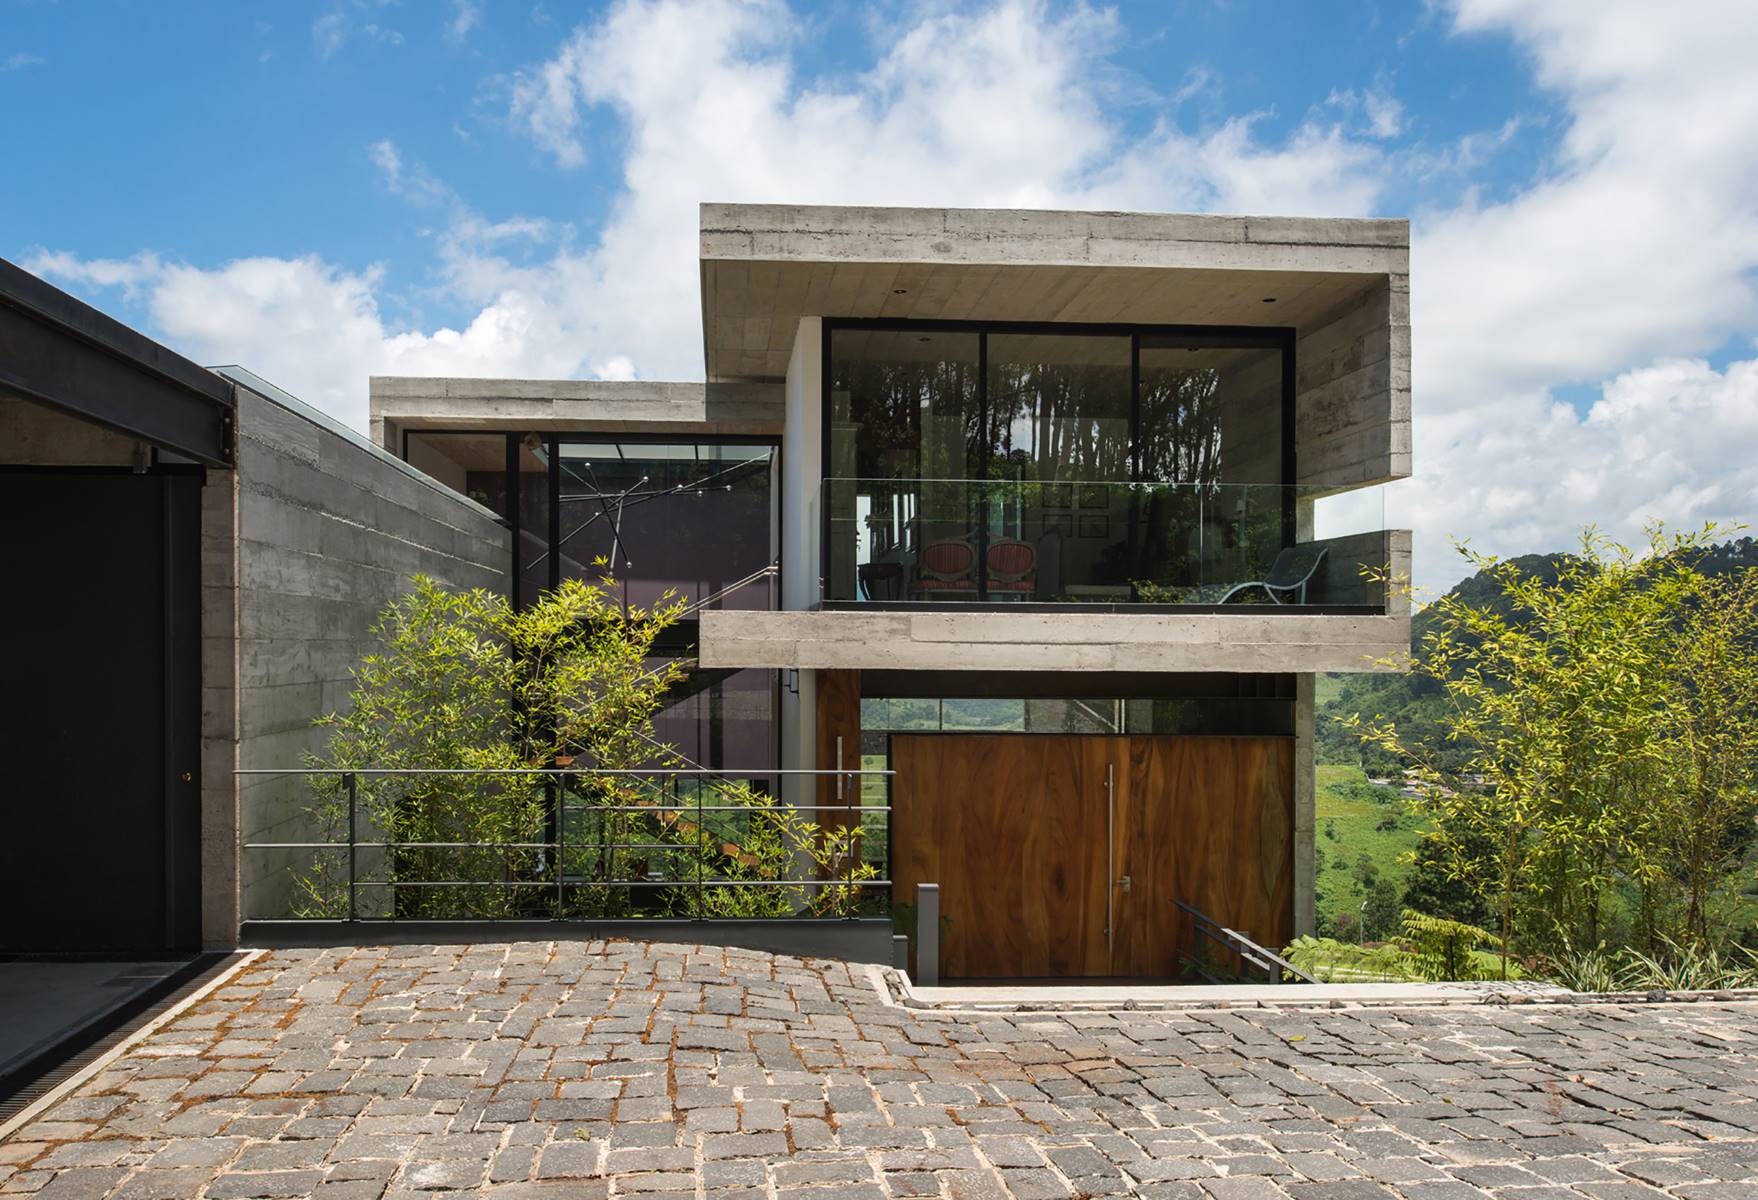 How To Design A House In Guatemala